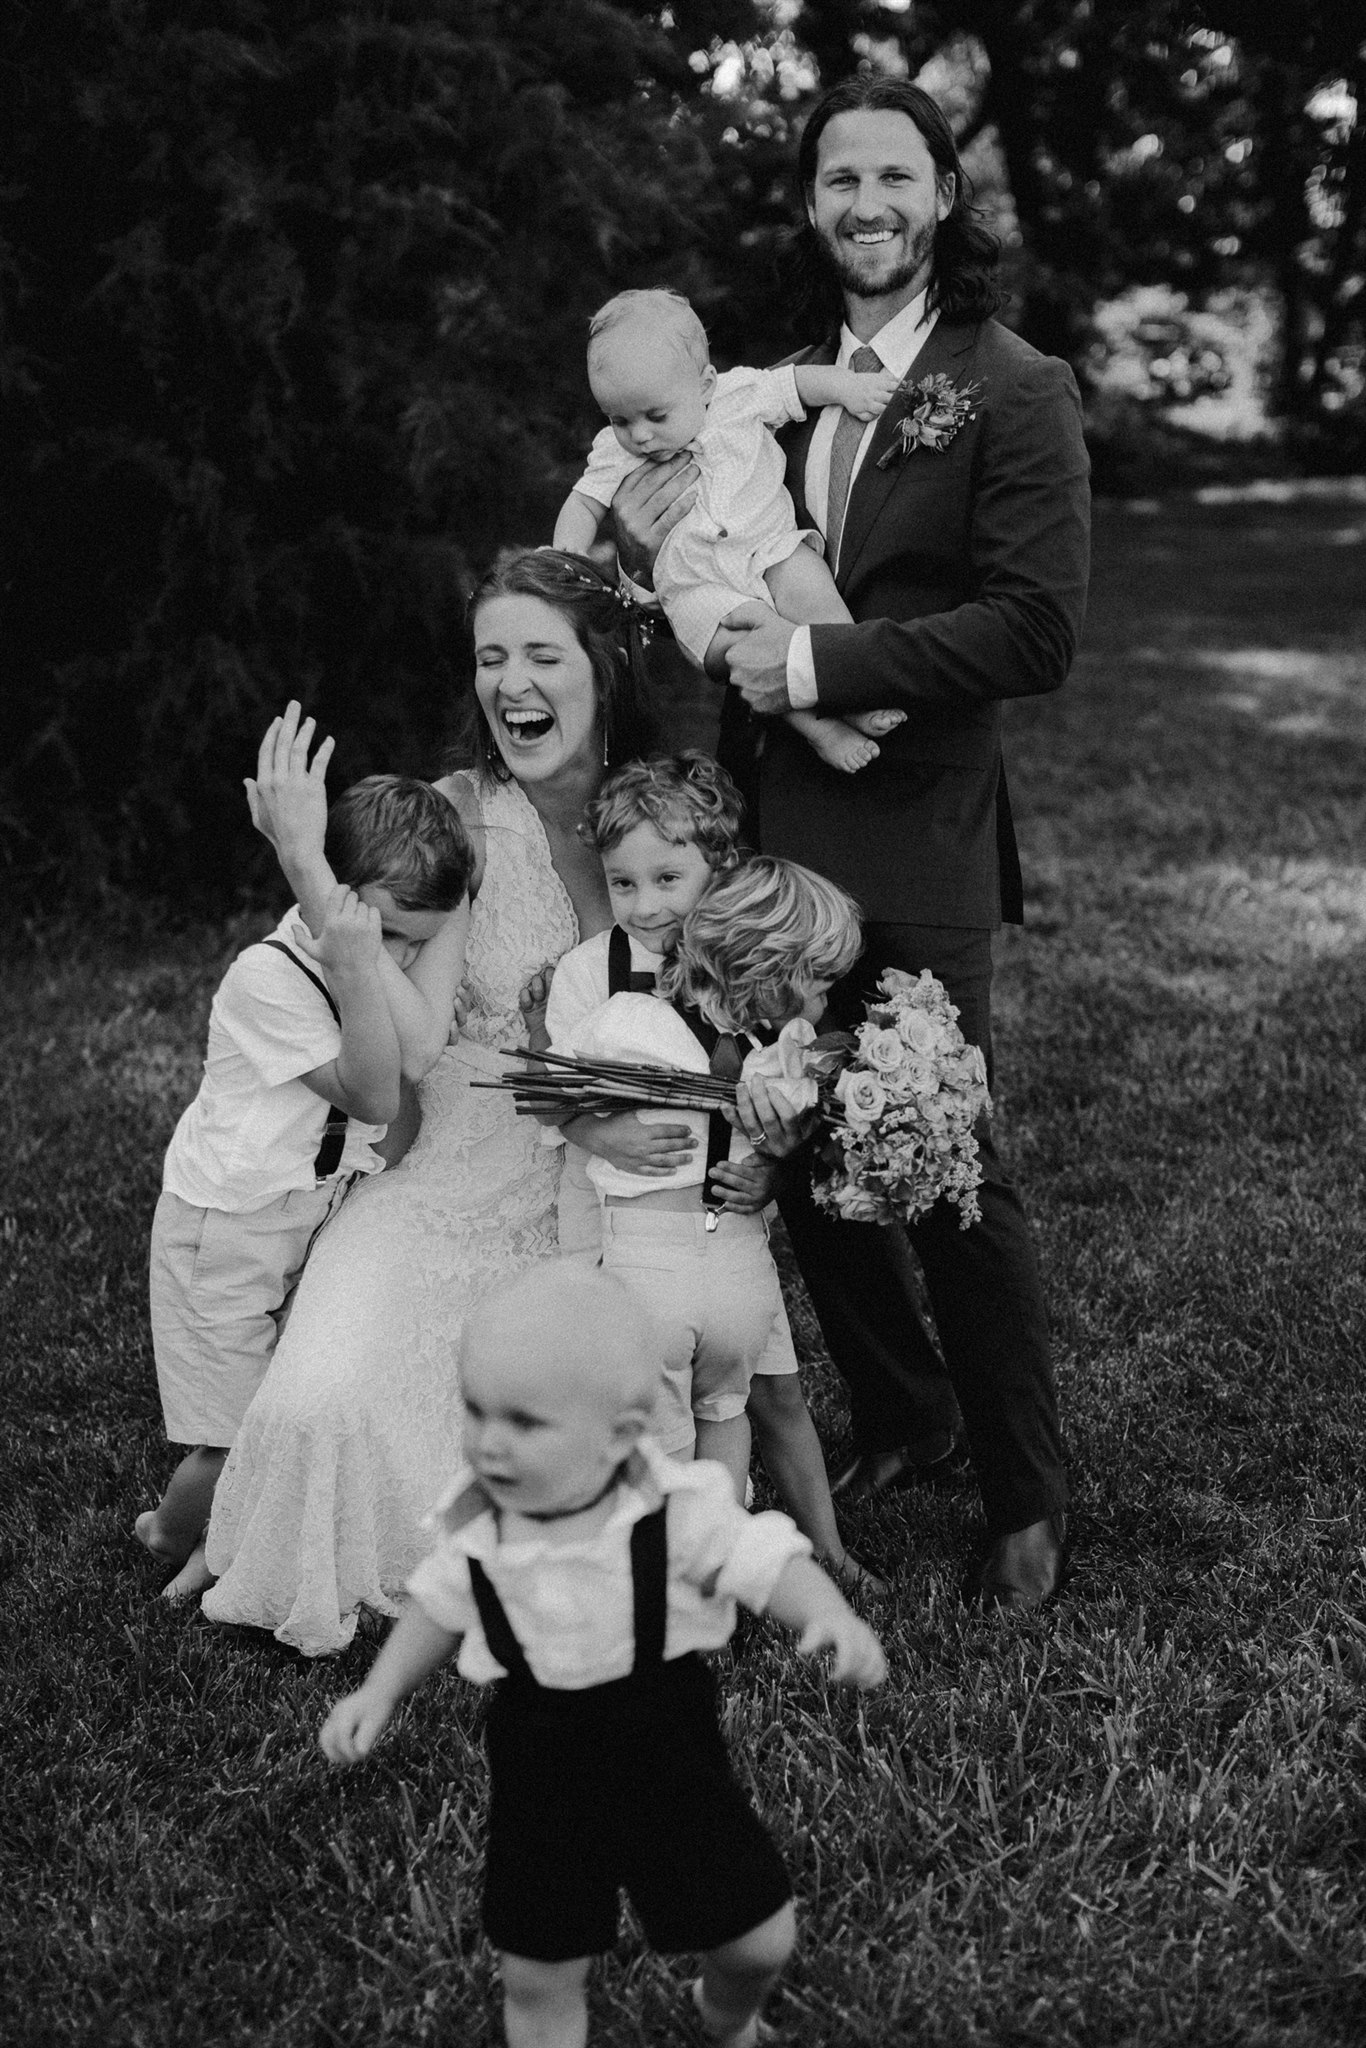 A man and woman laugh and embrace several babies and children.